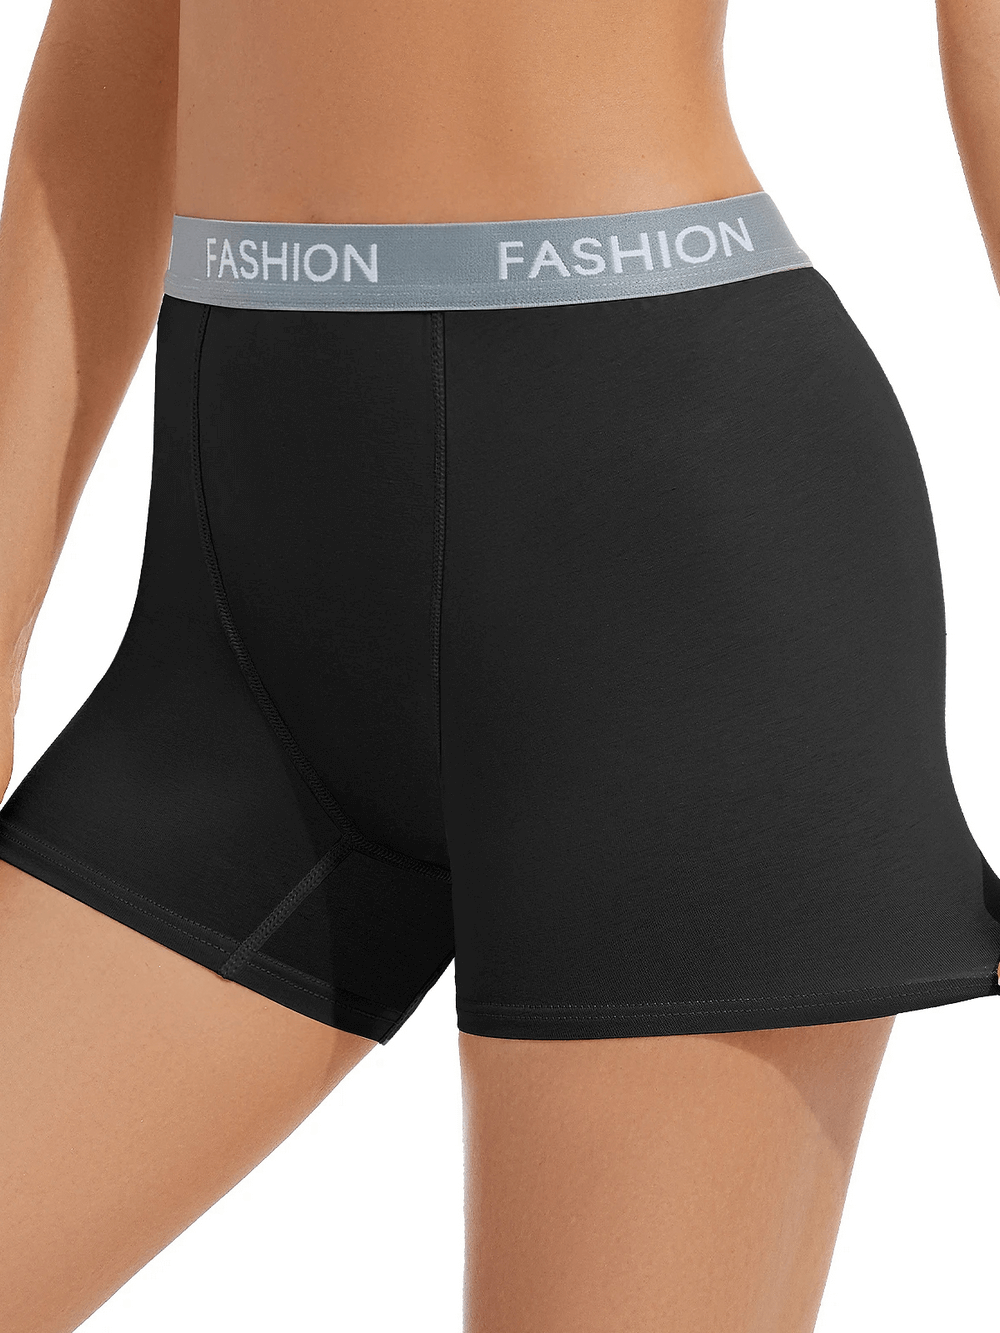 Sleek Athletic Boxer Briefs for Active Lifestyle - SF2174